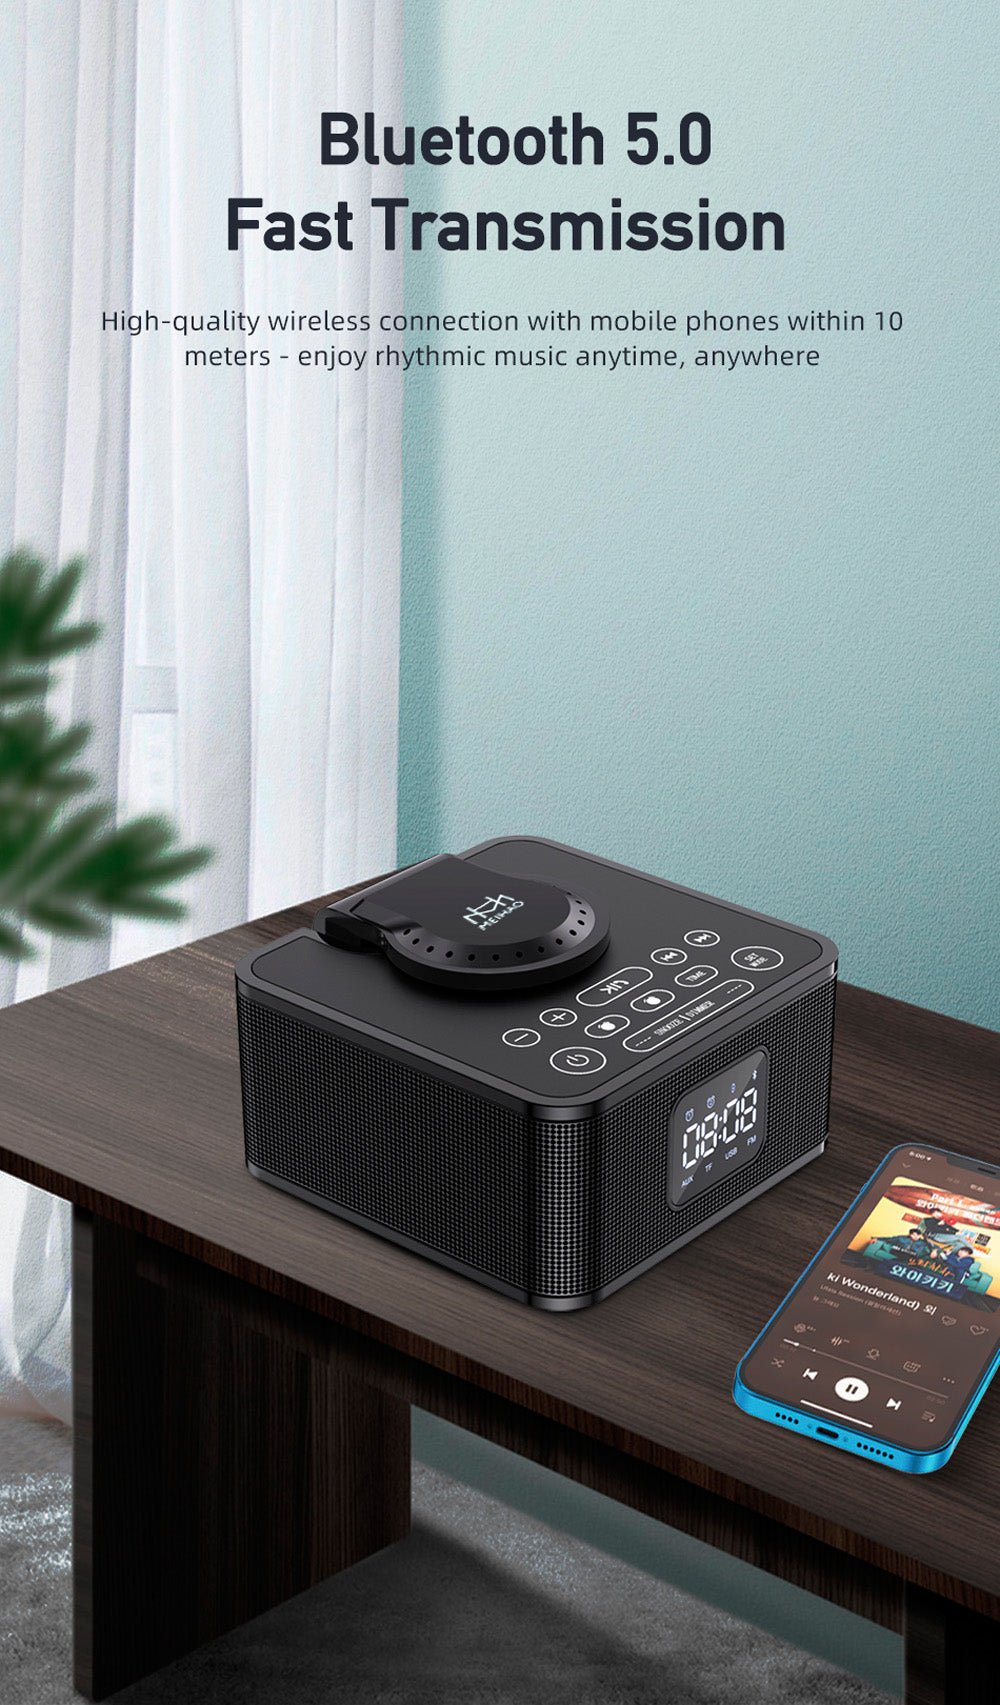 MH-2036 Multi-function audio Multifunctional desktop wireless bluetooth speaker with wireless charger - Edragonmall.com